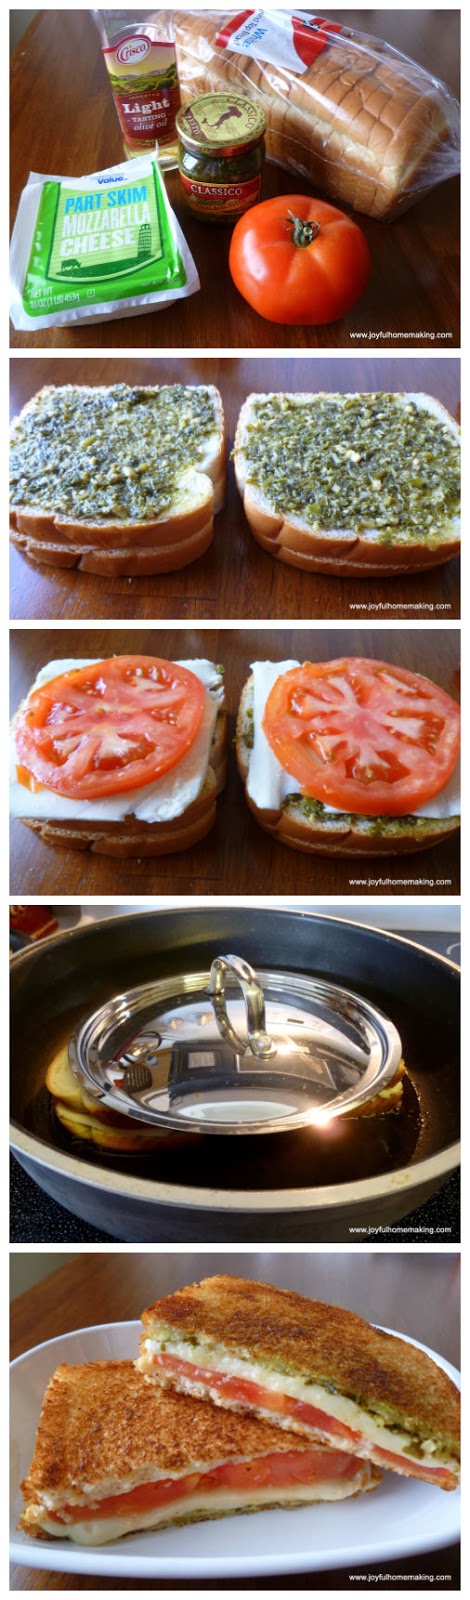 Grilled Cheese with Tomato and Pesto